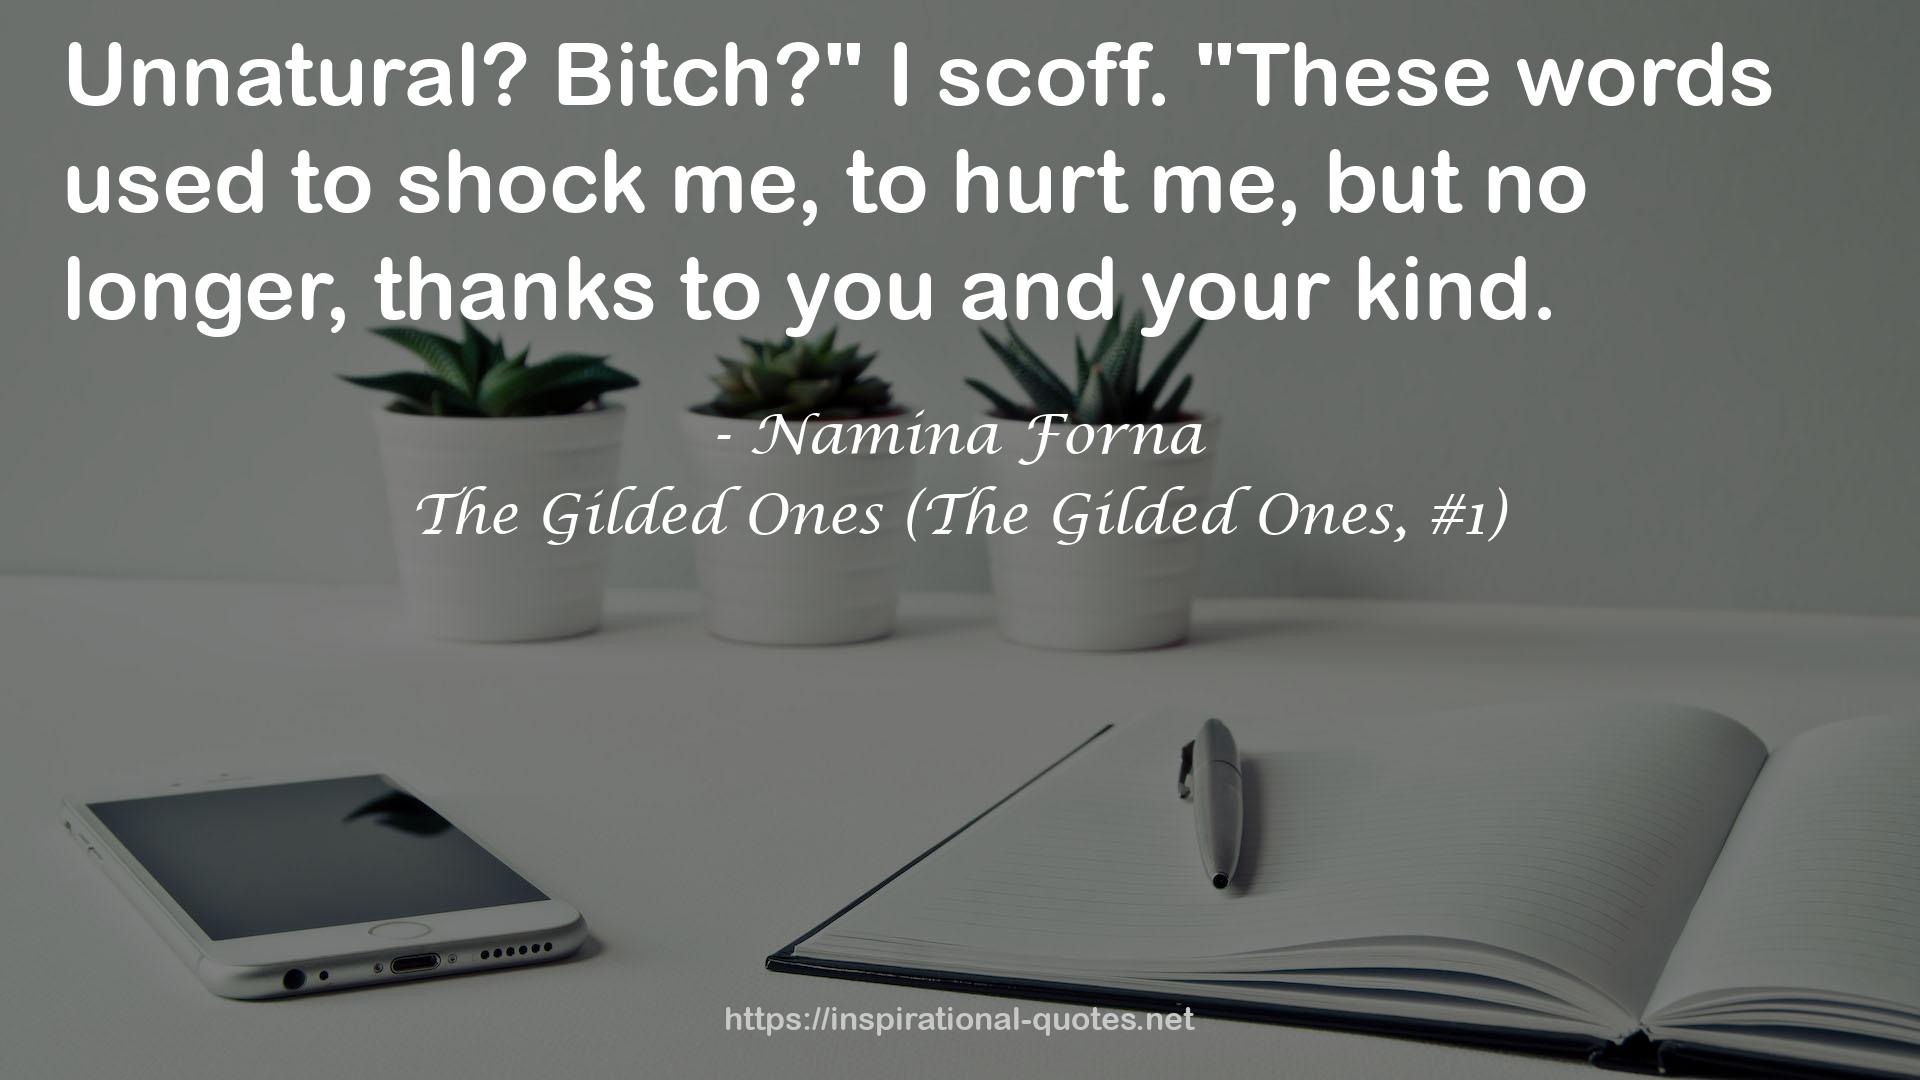 The Gilded Ones (The Gilded Ones, #1) QUOTES